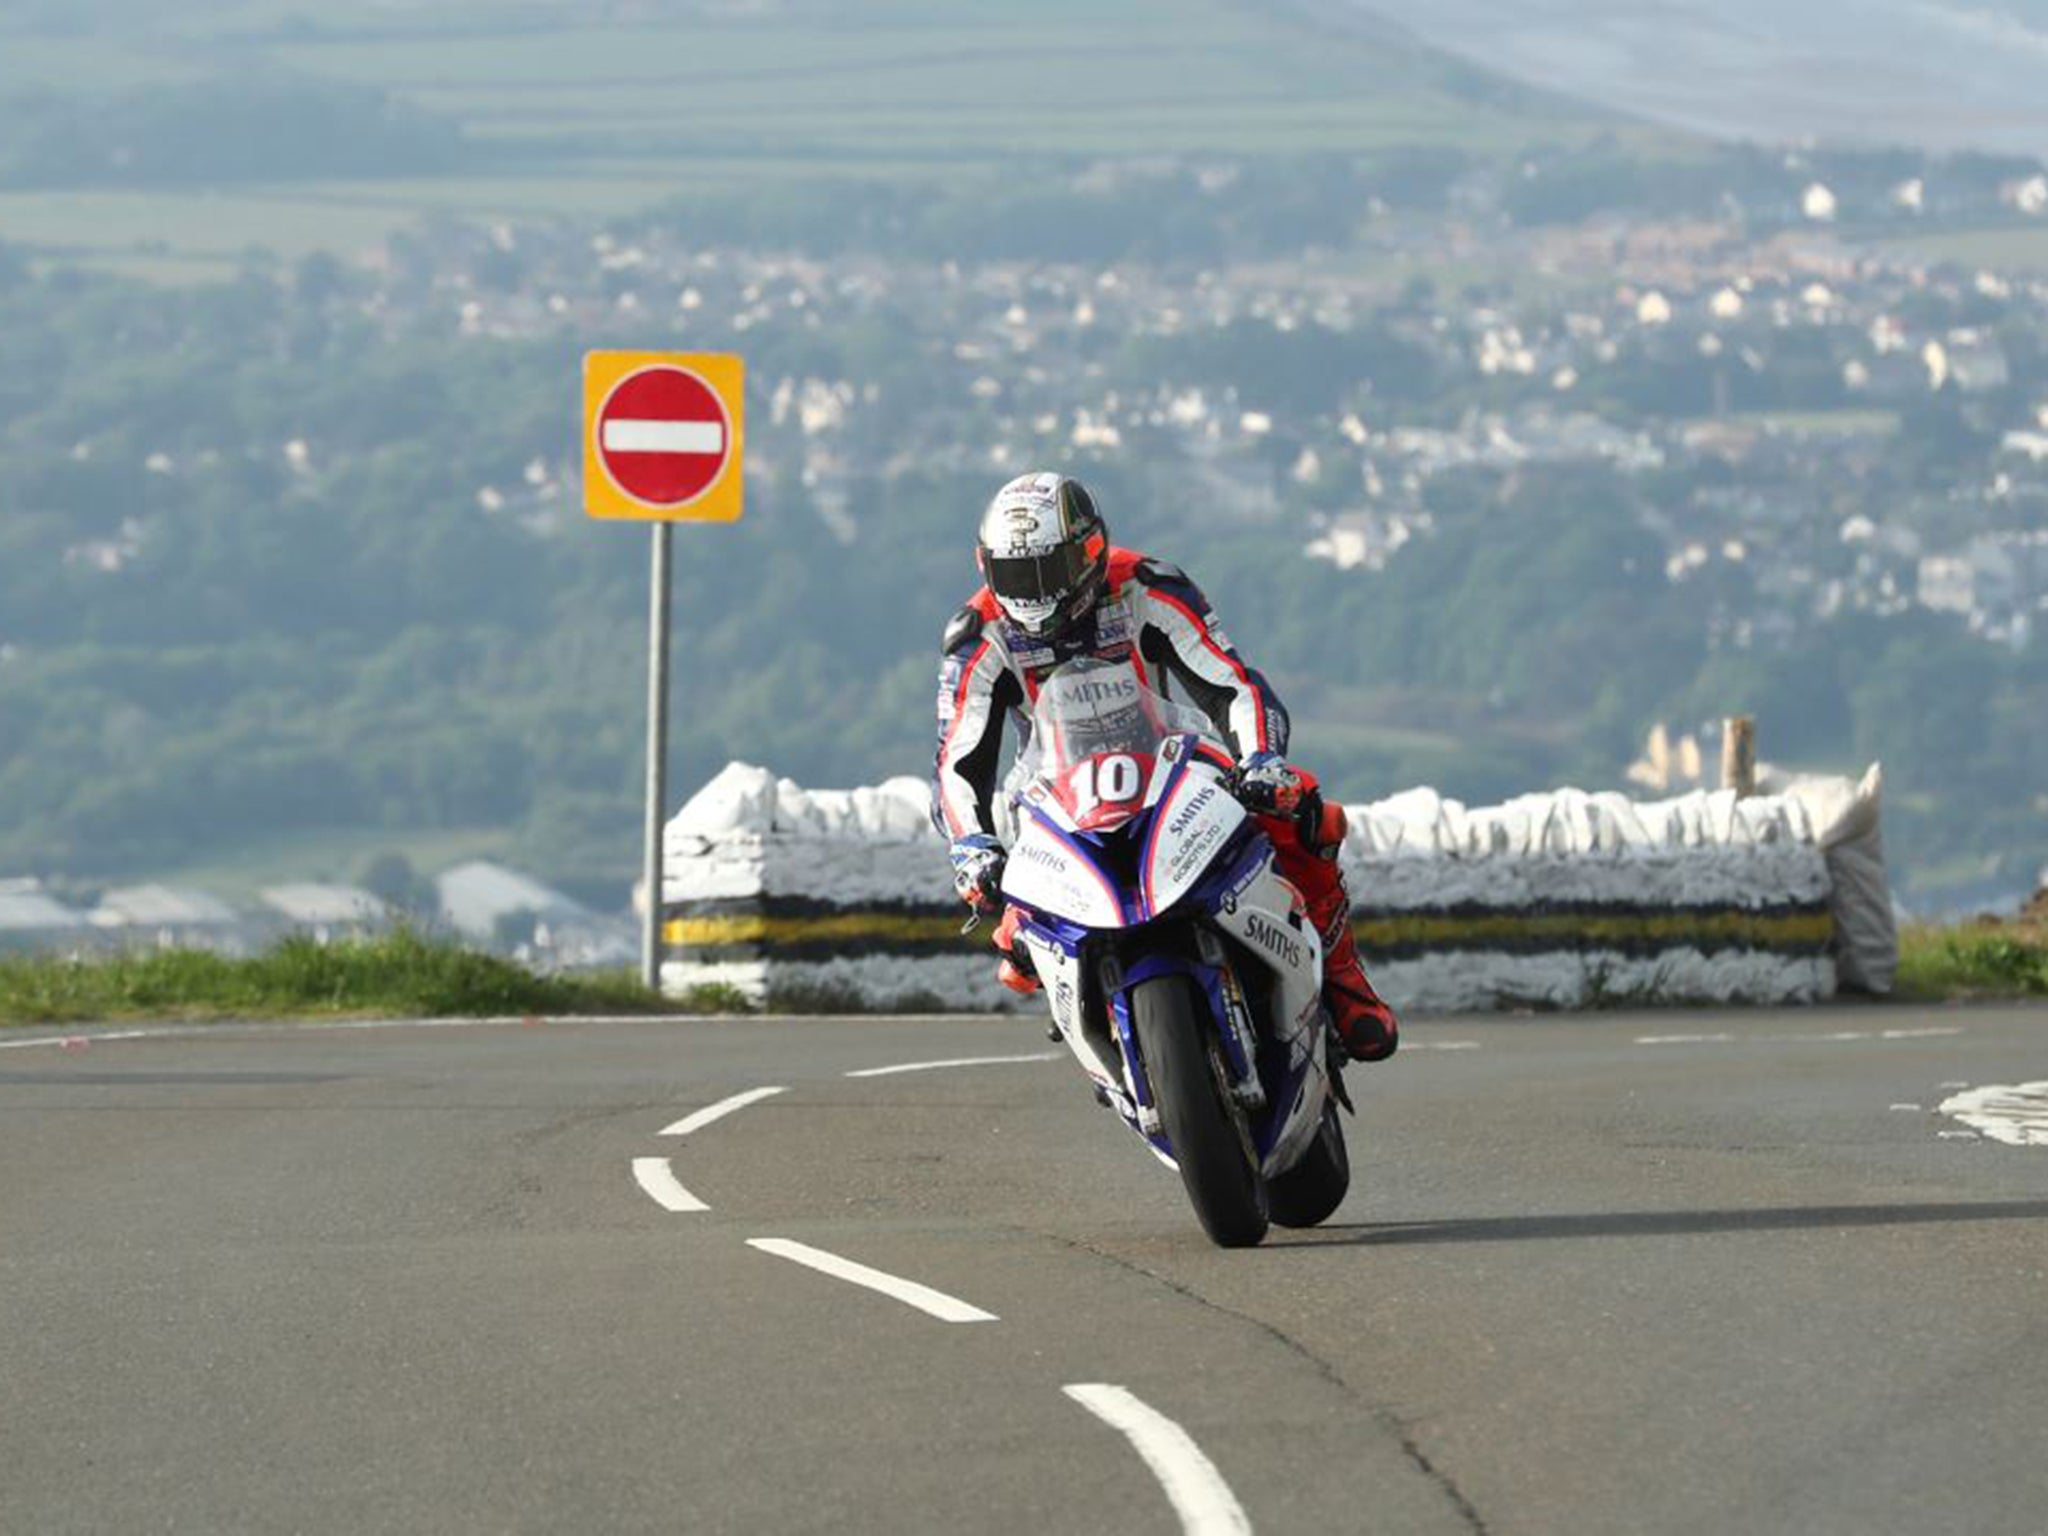 Hickman smashed the superstock lap record with an average speed of 134.077mph